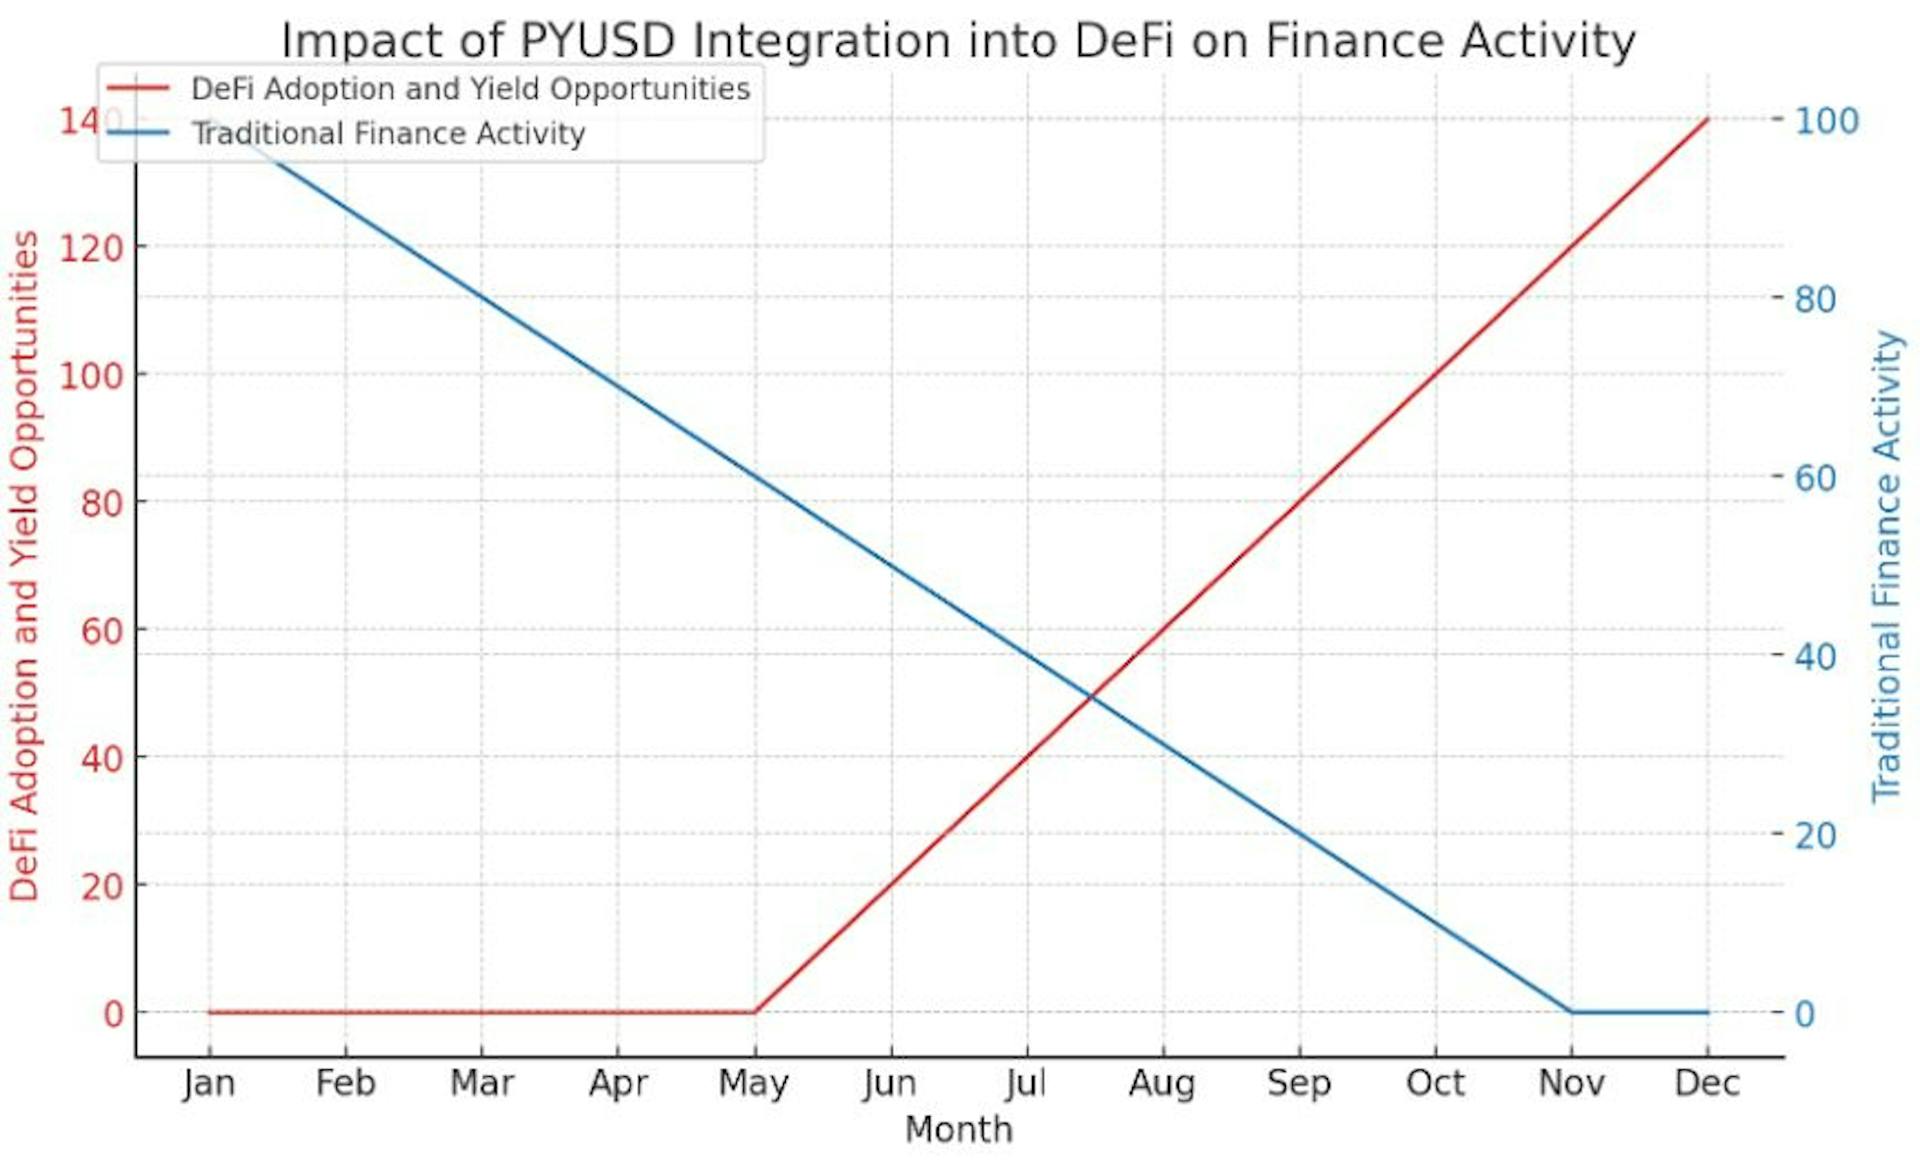 The chart visualizes the hypothetical impact of PYUSD's integration into the DeFi ecosystem, showcasing a significant increase in DeFi adoption and yield opportunities over time.